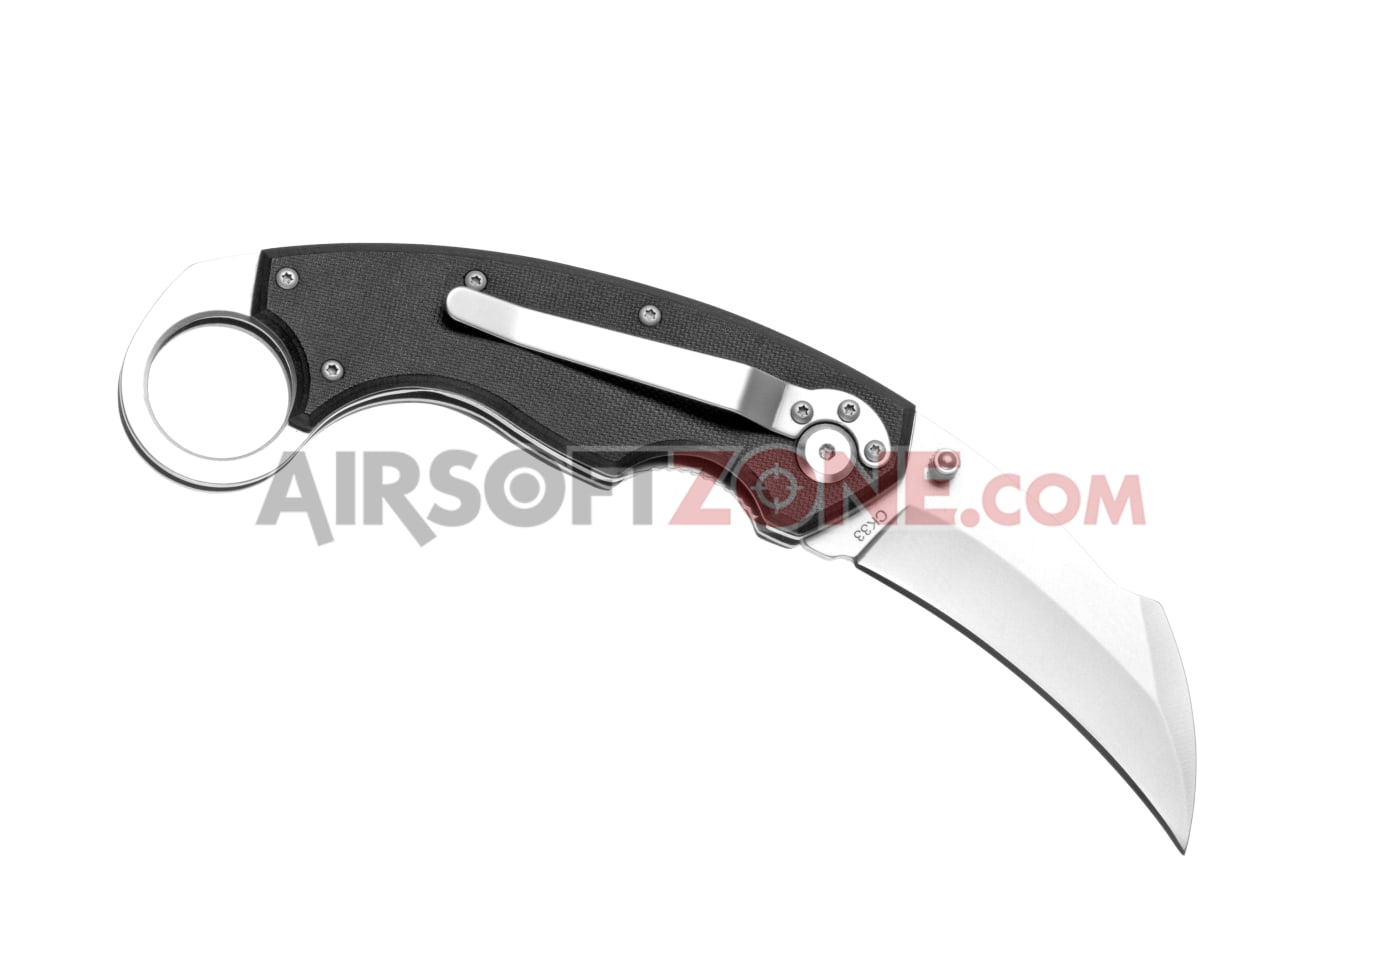 Smith & Wesson Extreme Ops CK33 Karambit (2024) - Airsoftzone